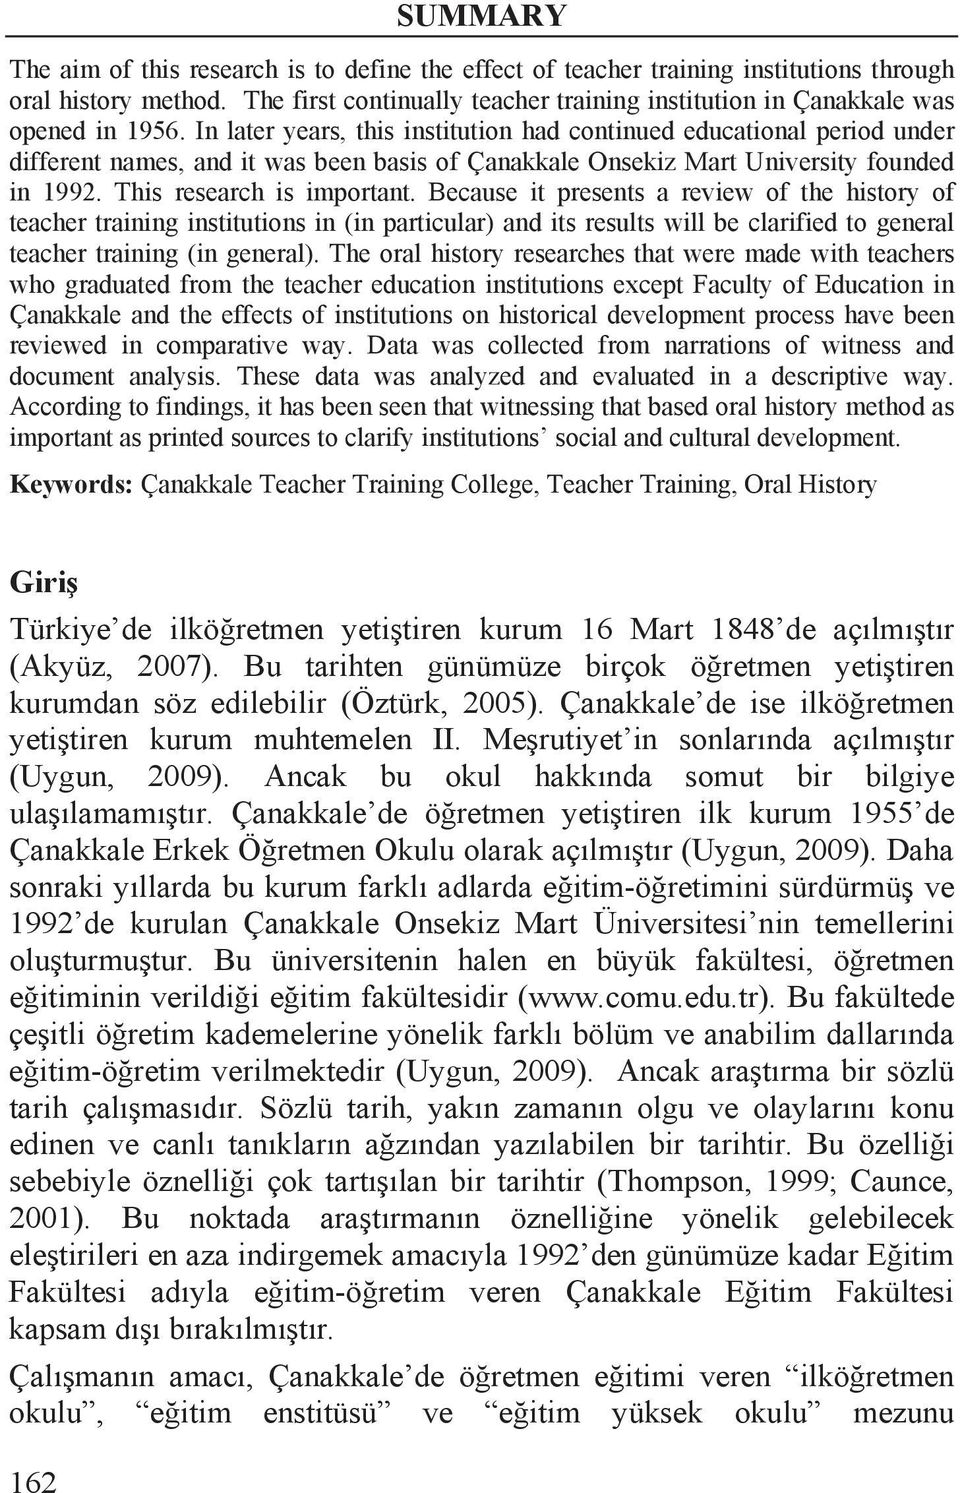 In later years, this institution had continued educational period under different names, and it was been basis of Çanakkale Onsekiz Mart University founded in 1992. This research is important.